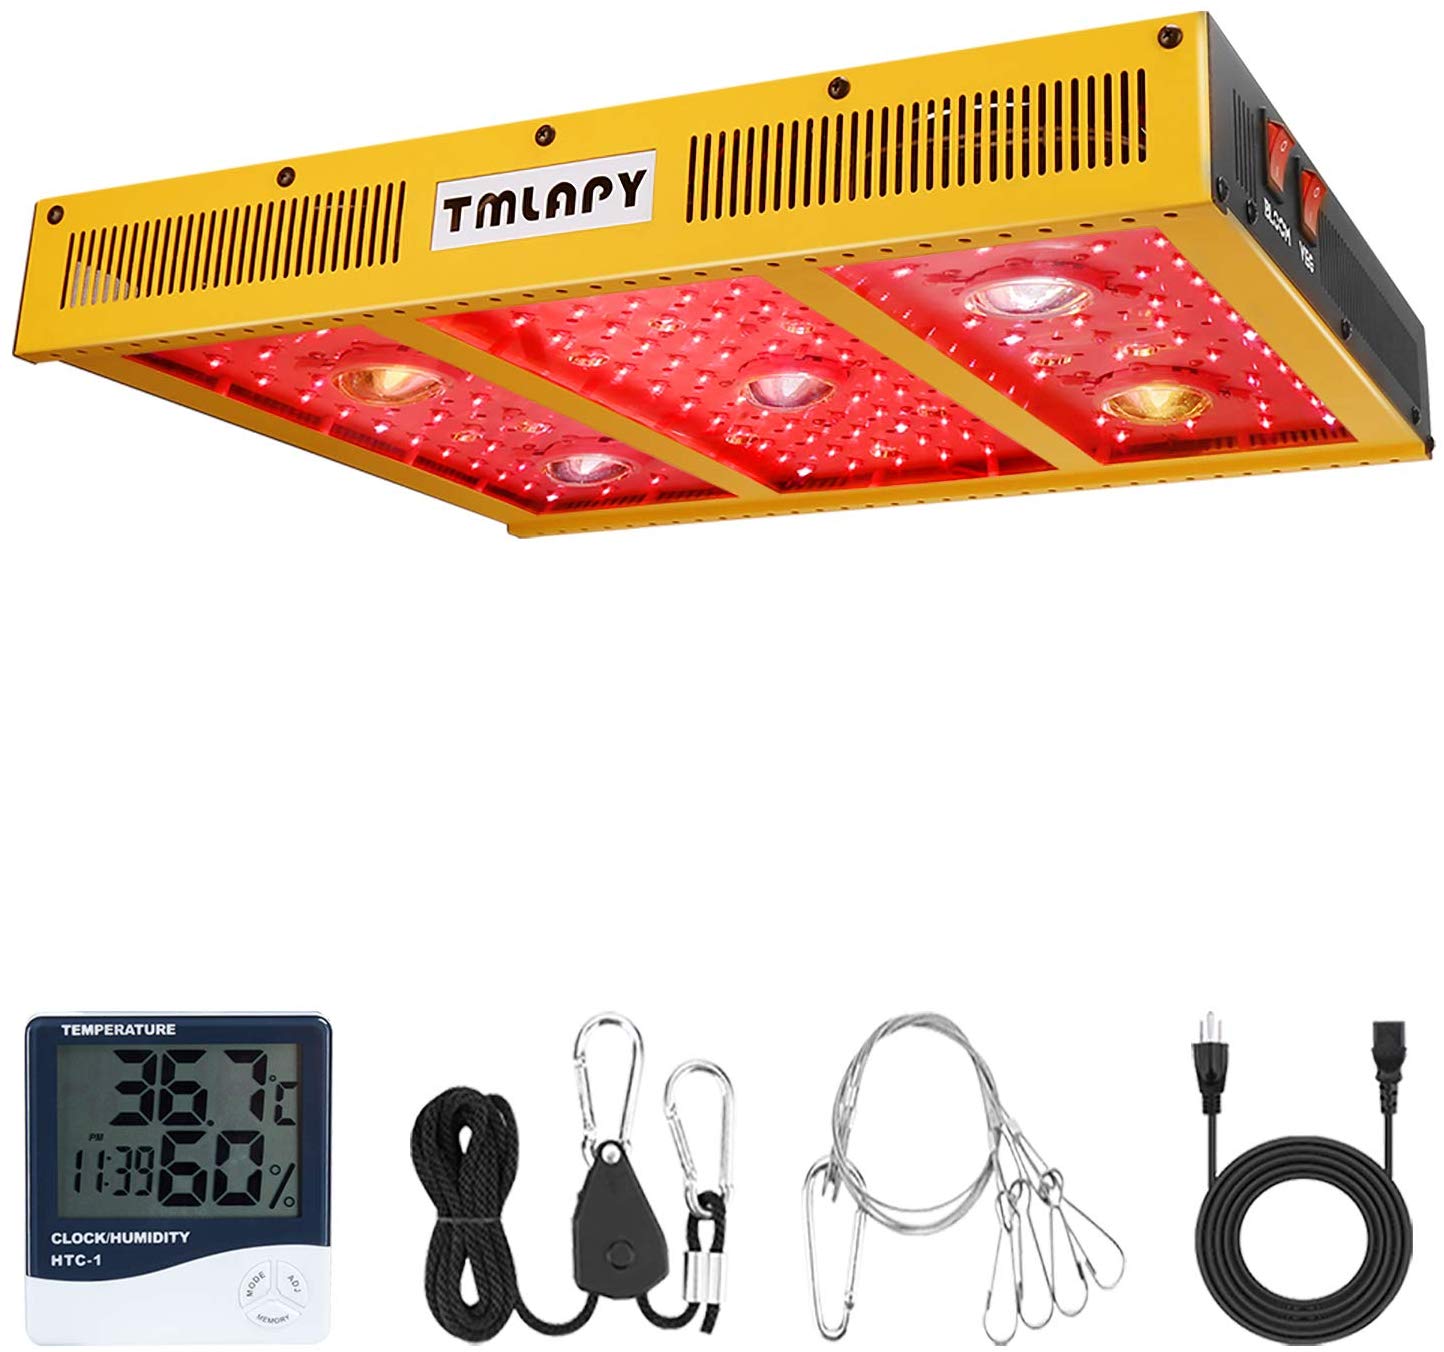 Tmlapy COB LED Grow Light 2500W – Full Spectrum Reflector Series LED Grow Light with Veg and Bloom Switch for Hydroponic Greenhouse Indoor Plants Veg and Flower(Actual Power 530watt)